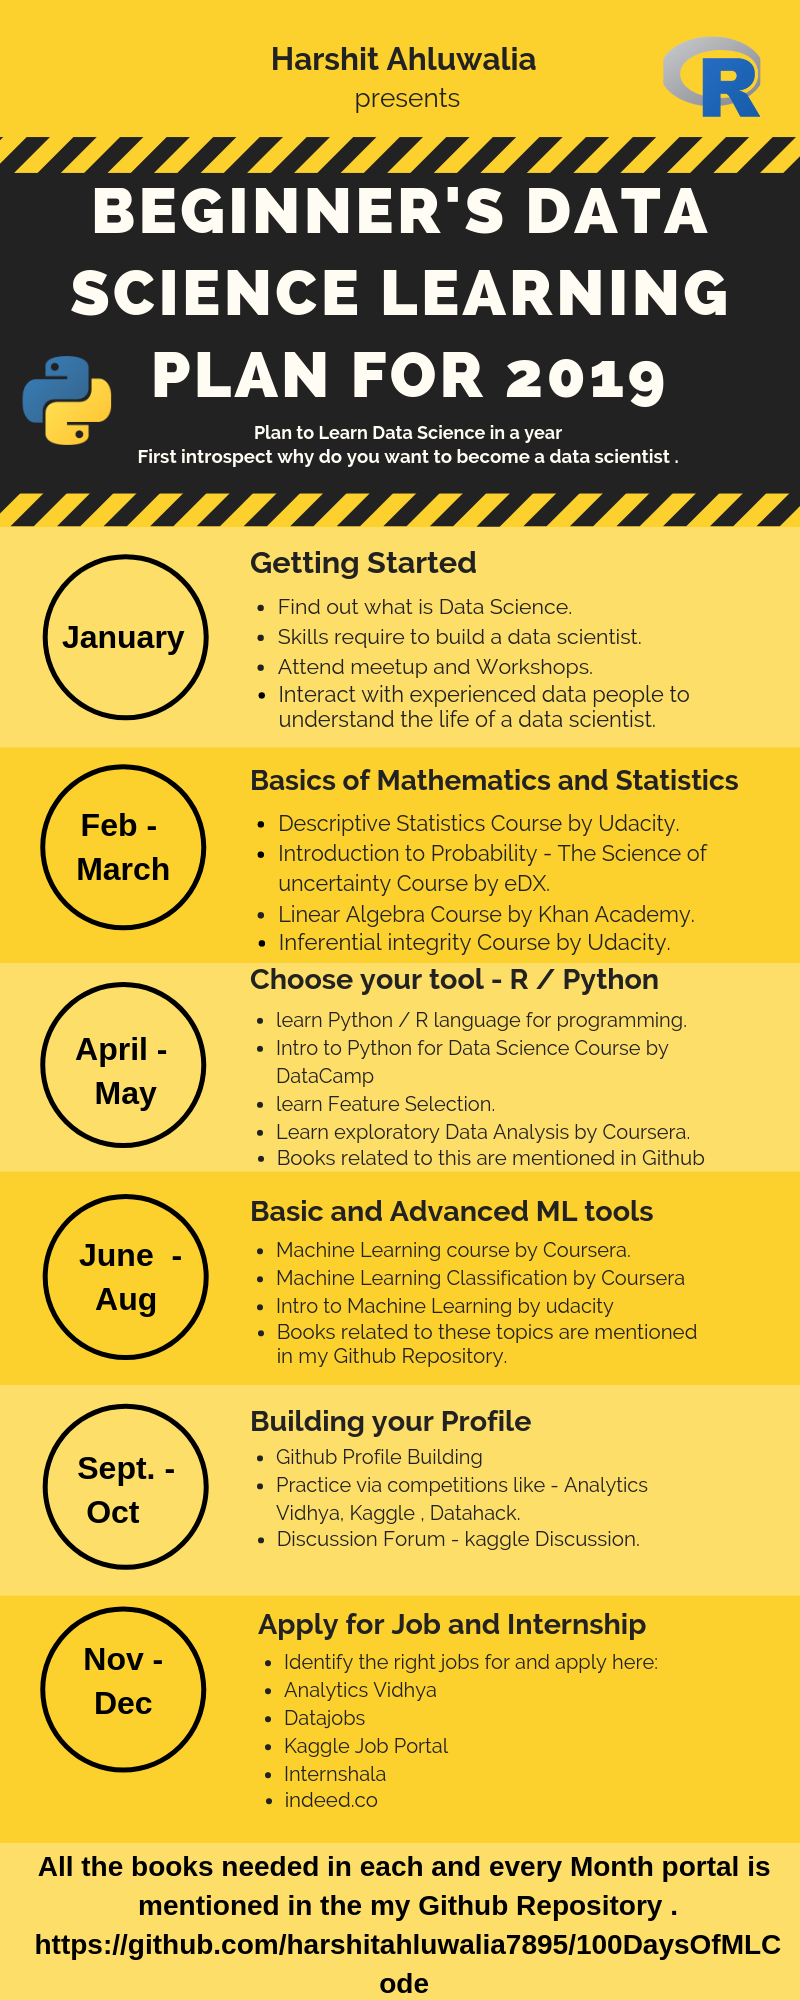 Beginner's Data Science Learning Plean for 2019 (1).png